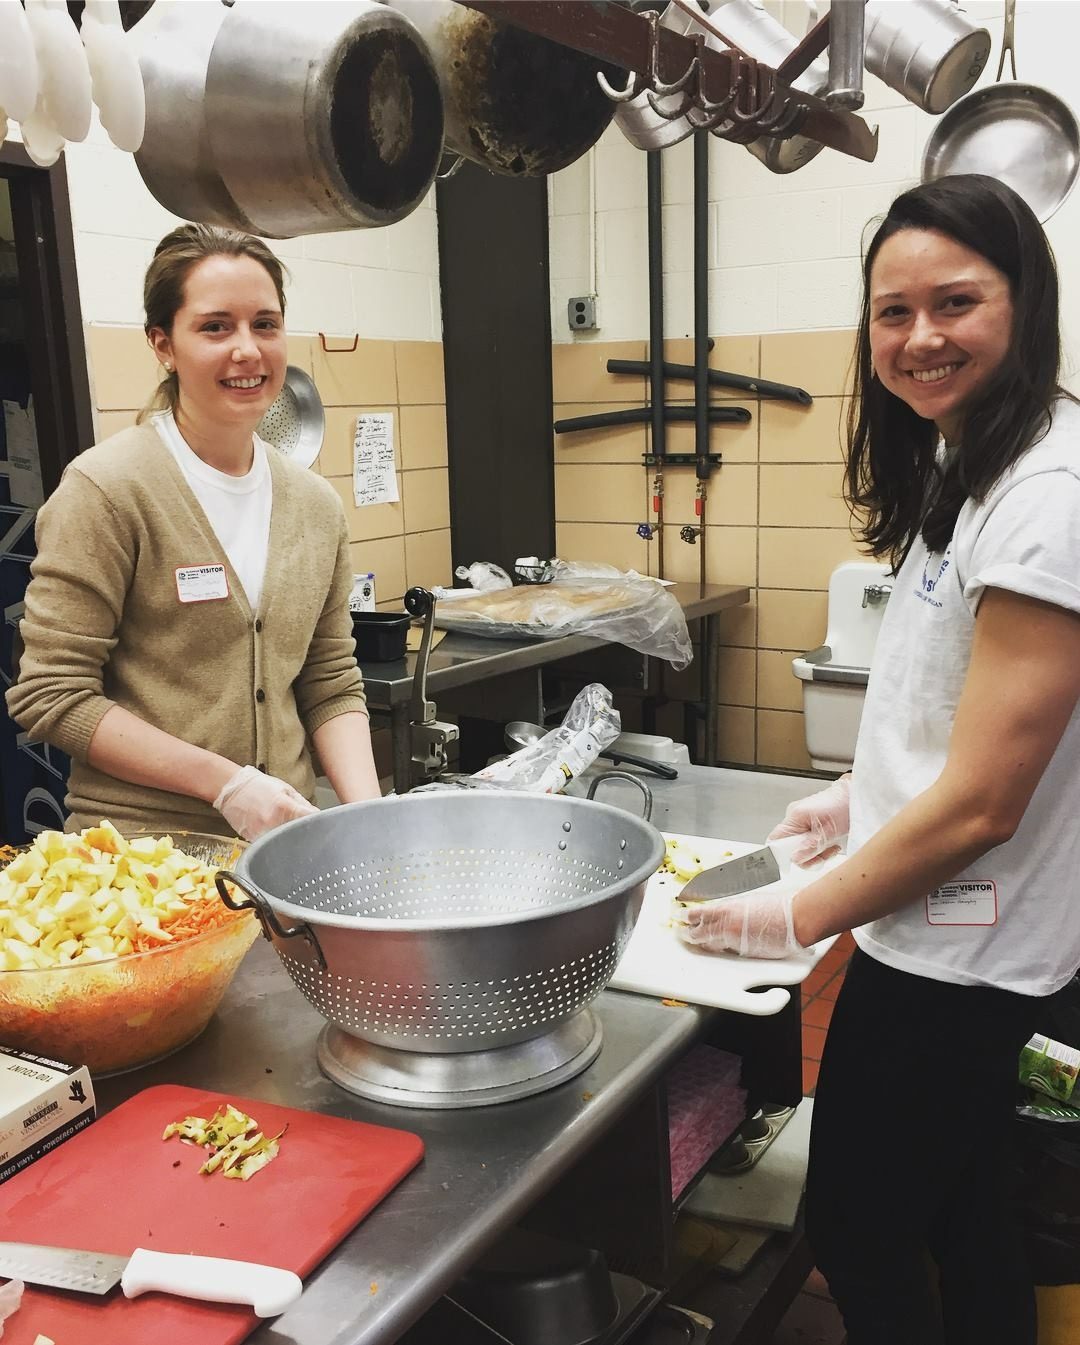 Two female project community students smiling while prepping food in a school kitchen